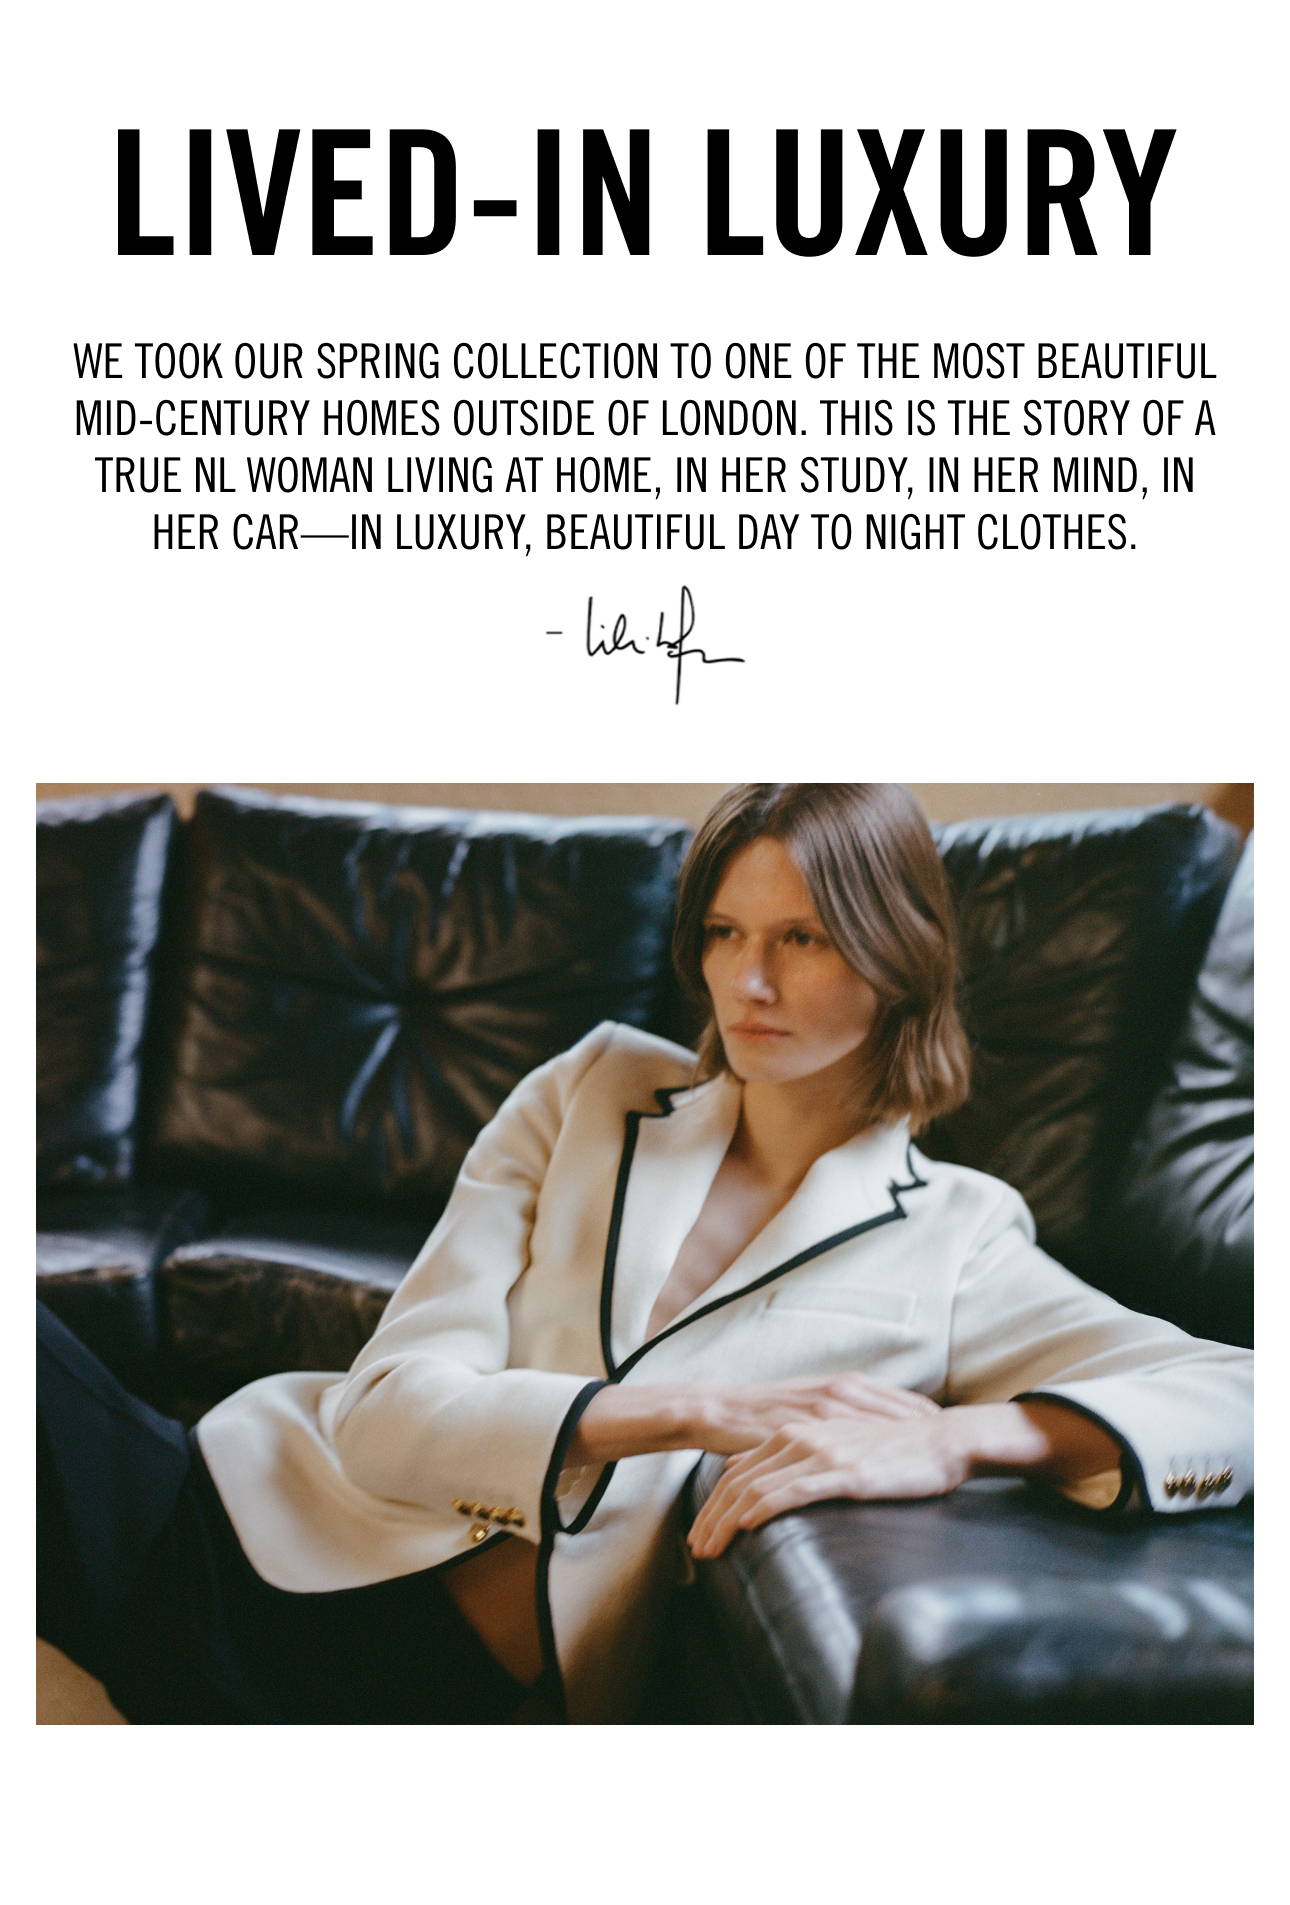 Image of model sitting on black couch and text about our spring collection